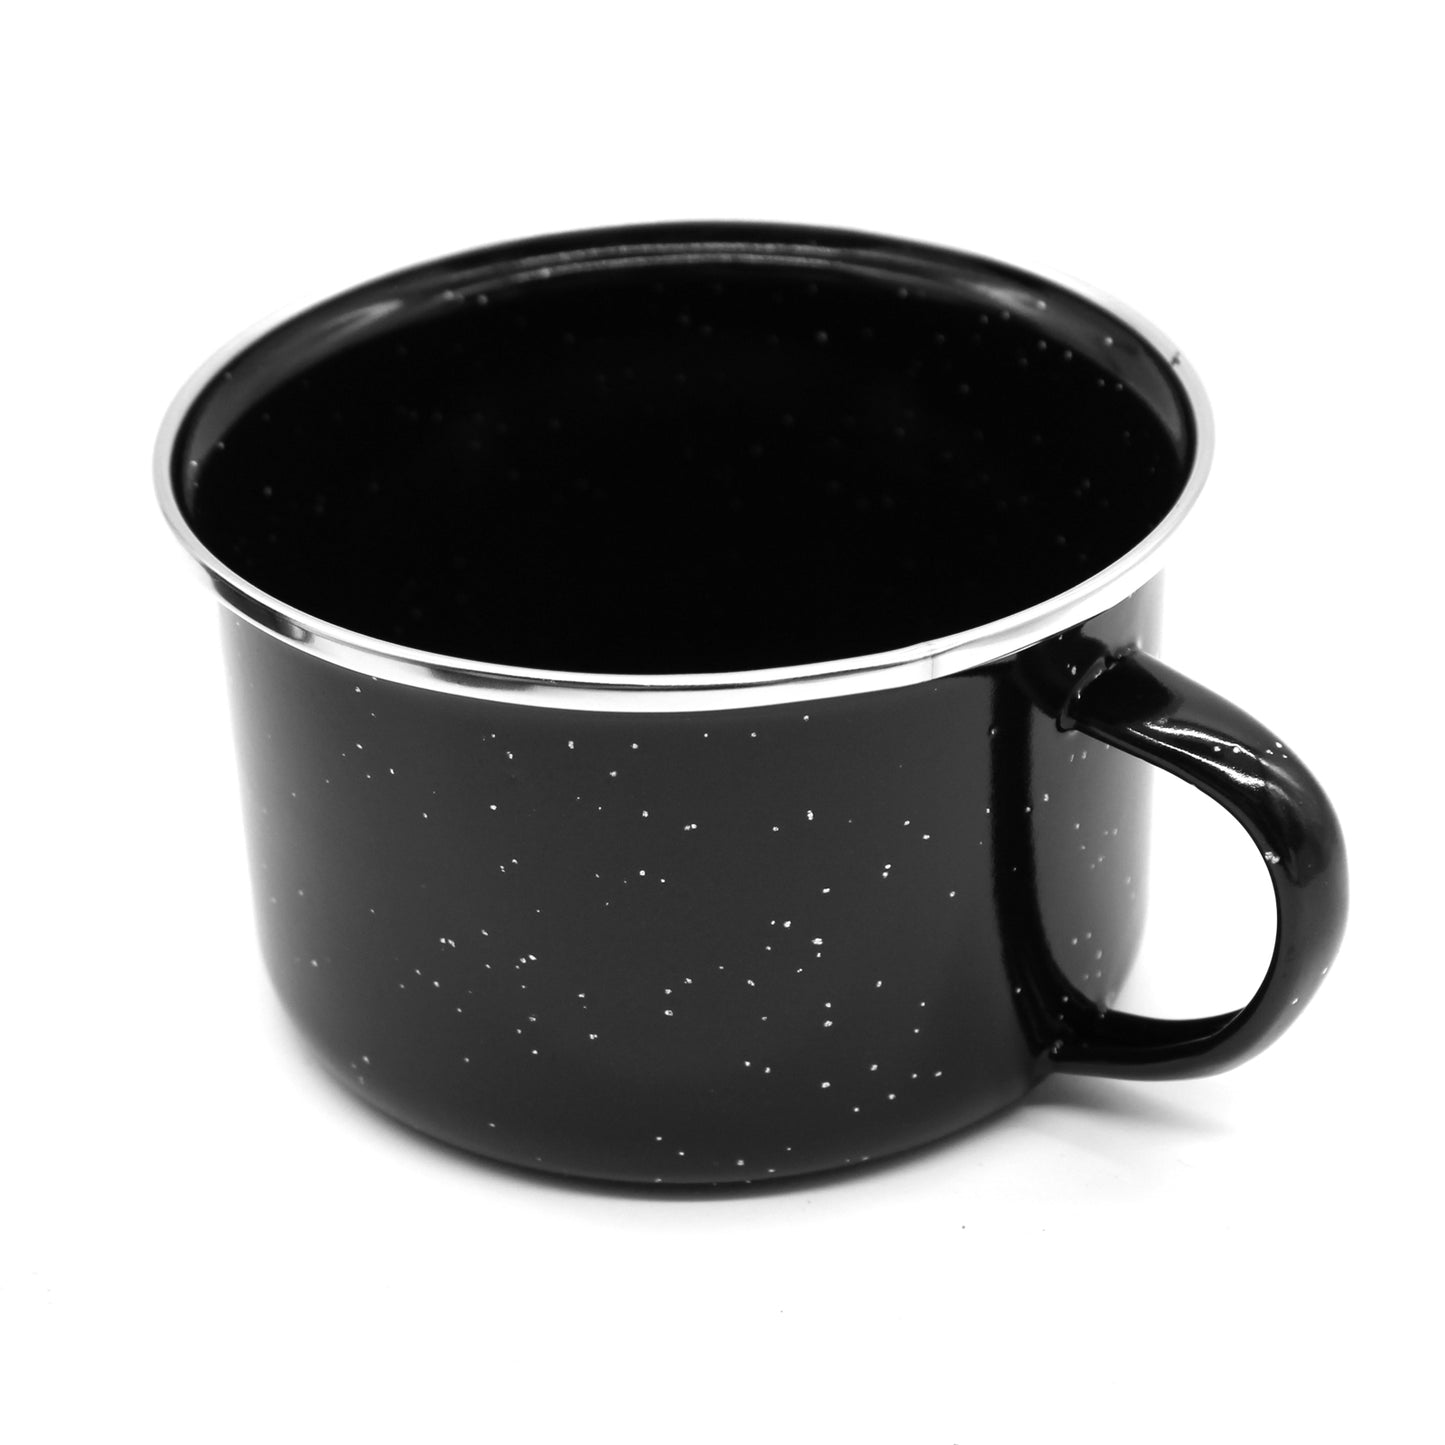 Cup for drinking tea or coffee whilst camping